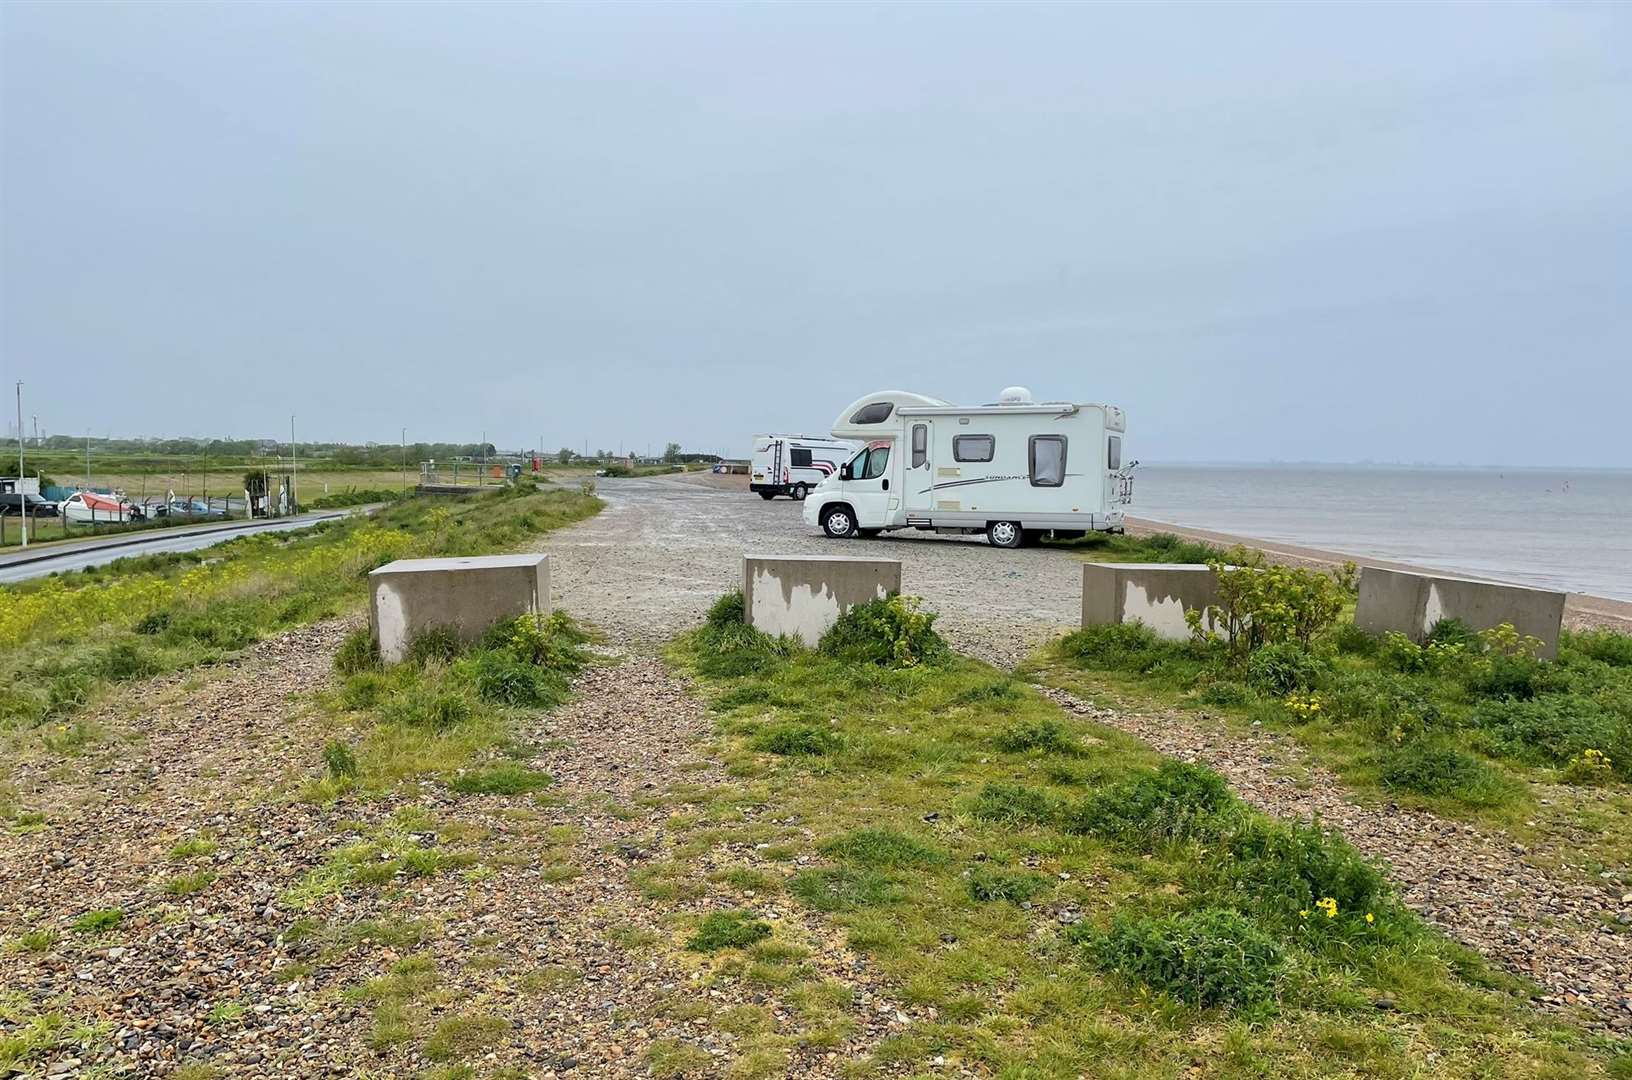 Bollards were installed on the Shingle Bank beach by Swale council in August 2020. Picture: Joe Crossley